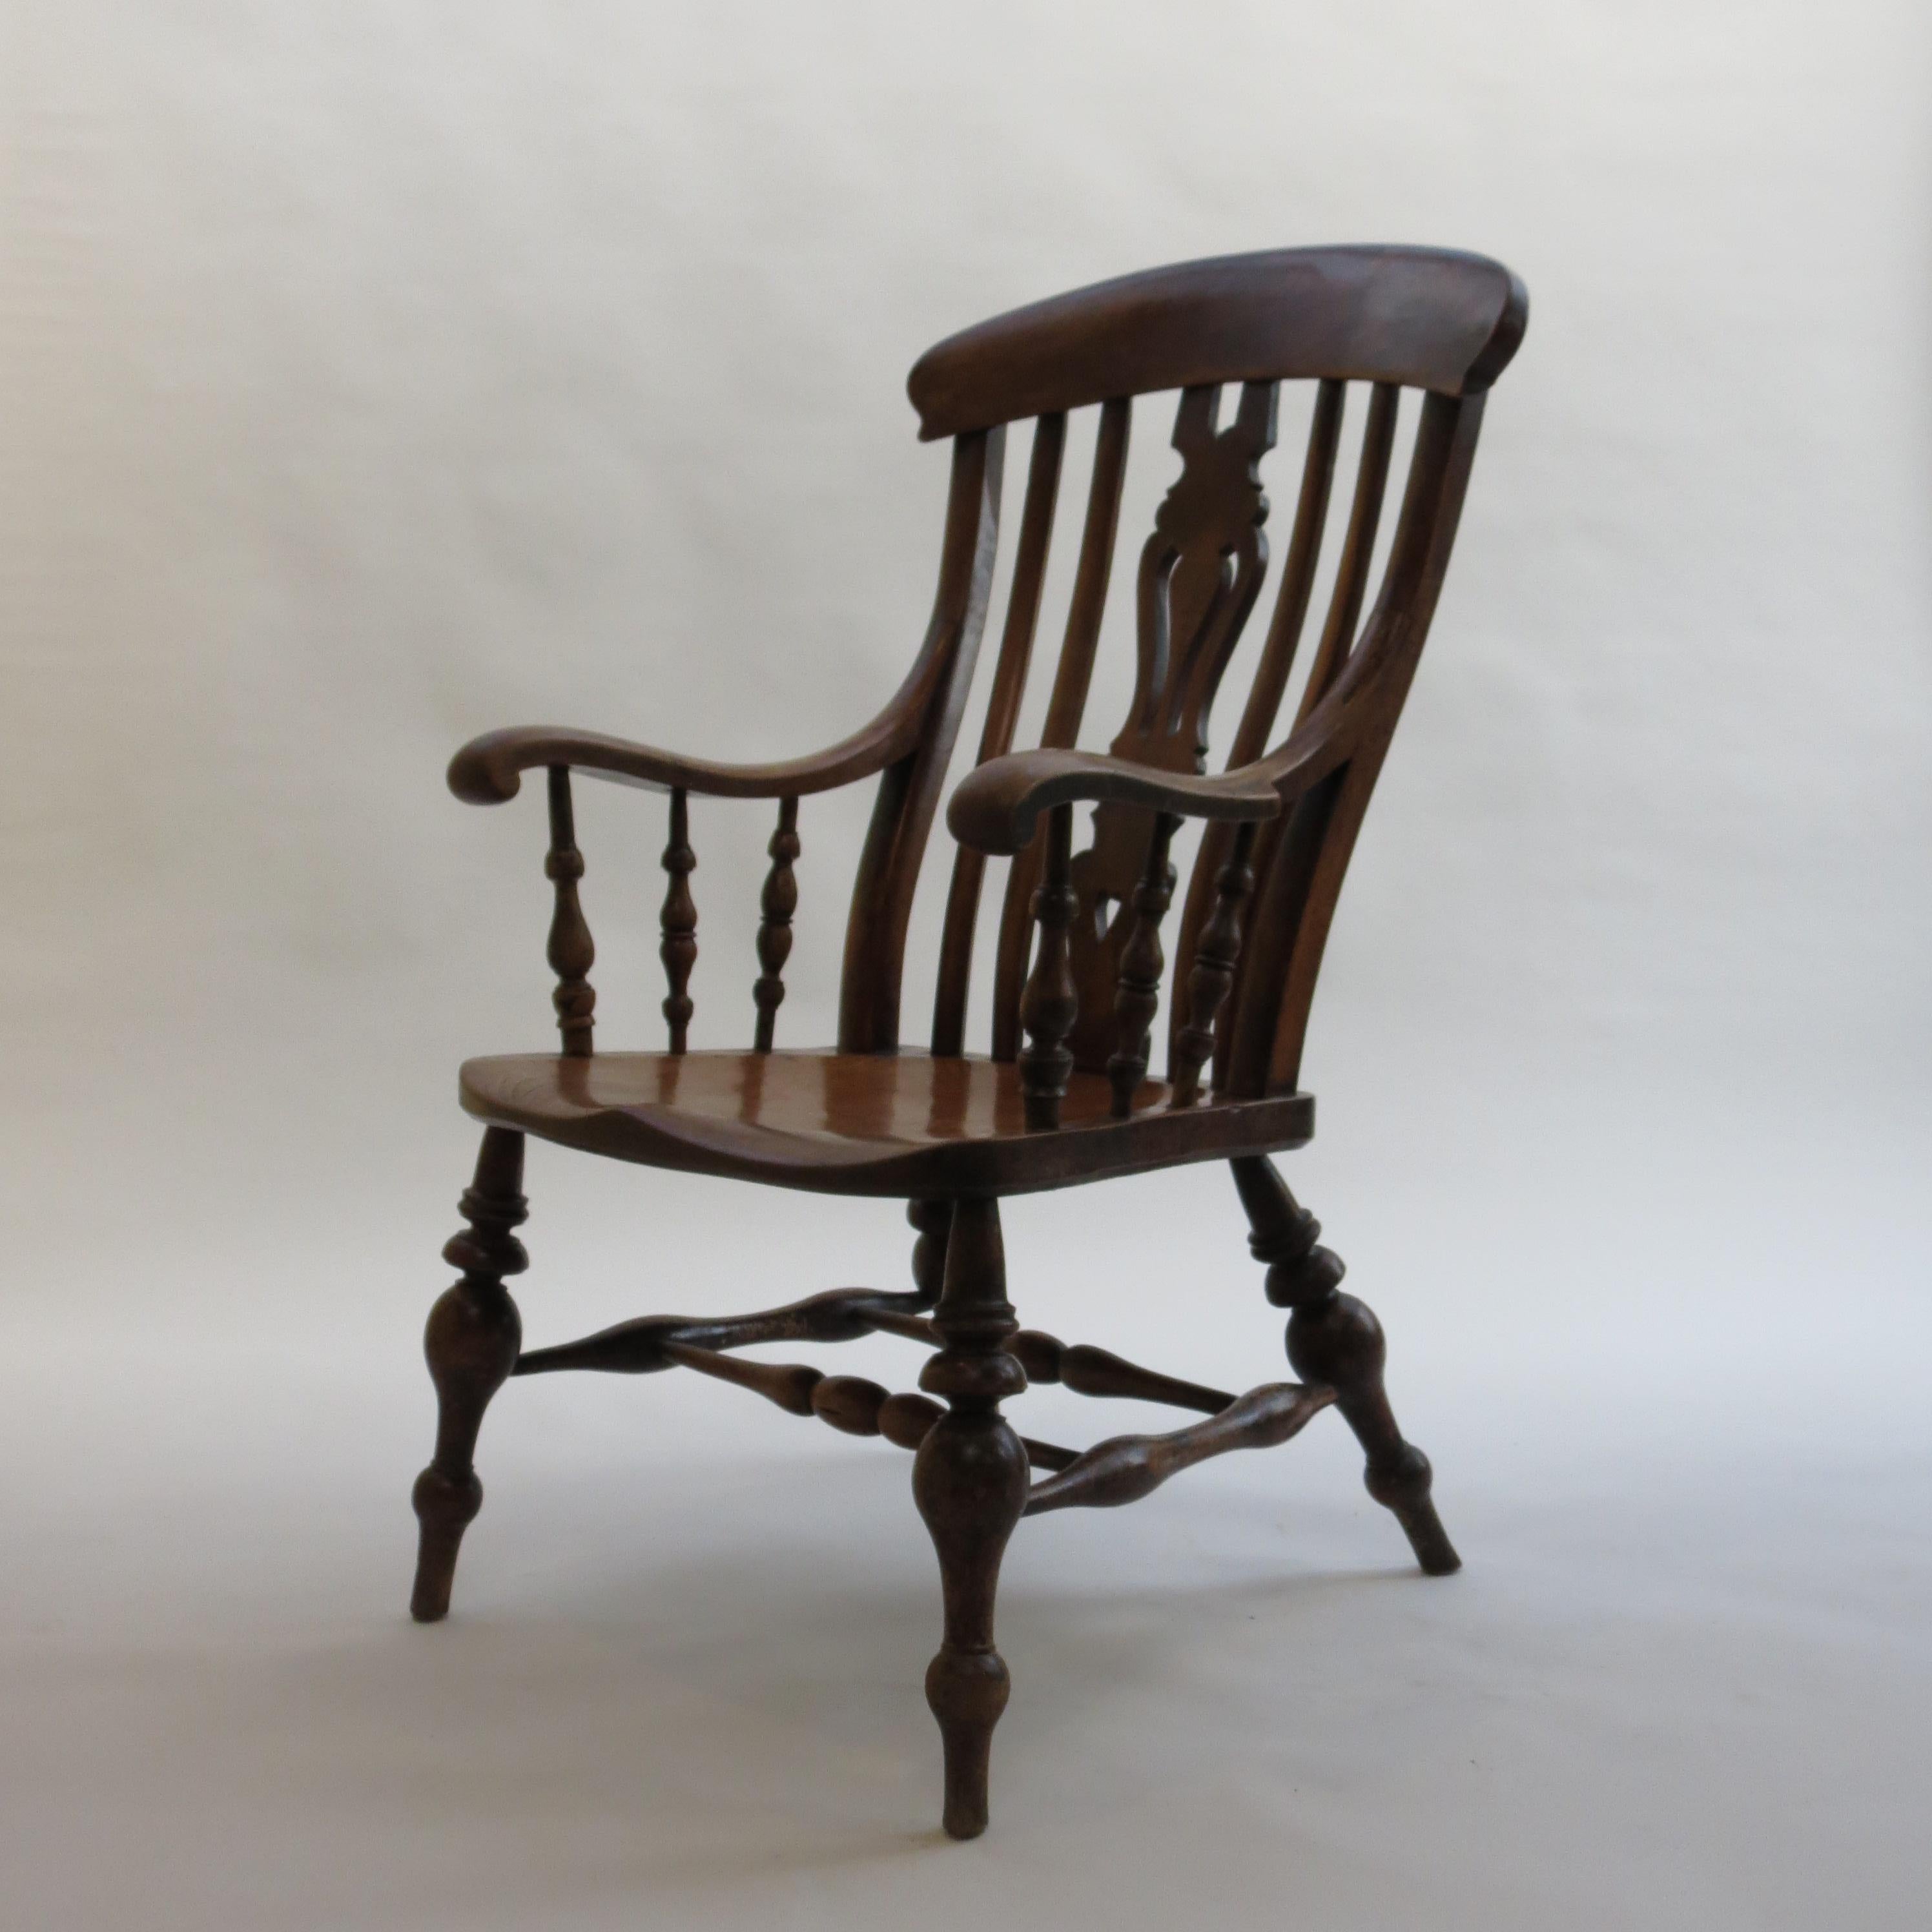 A very large English country Windsor chair from the 19th Century.  

Very large proportions, wonderful turned bulbous legs and double stretcher detail.  Sycamore arms and back rest, large Ash Seat. Dates from the 1880s.
The wood is wonderfully